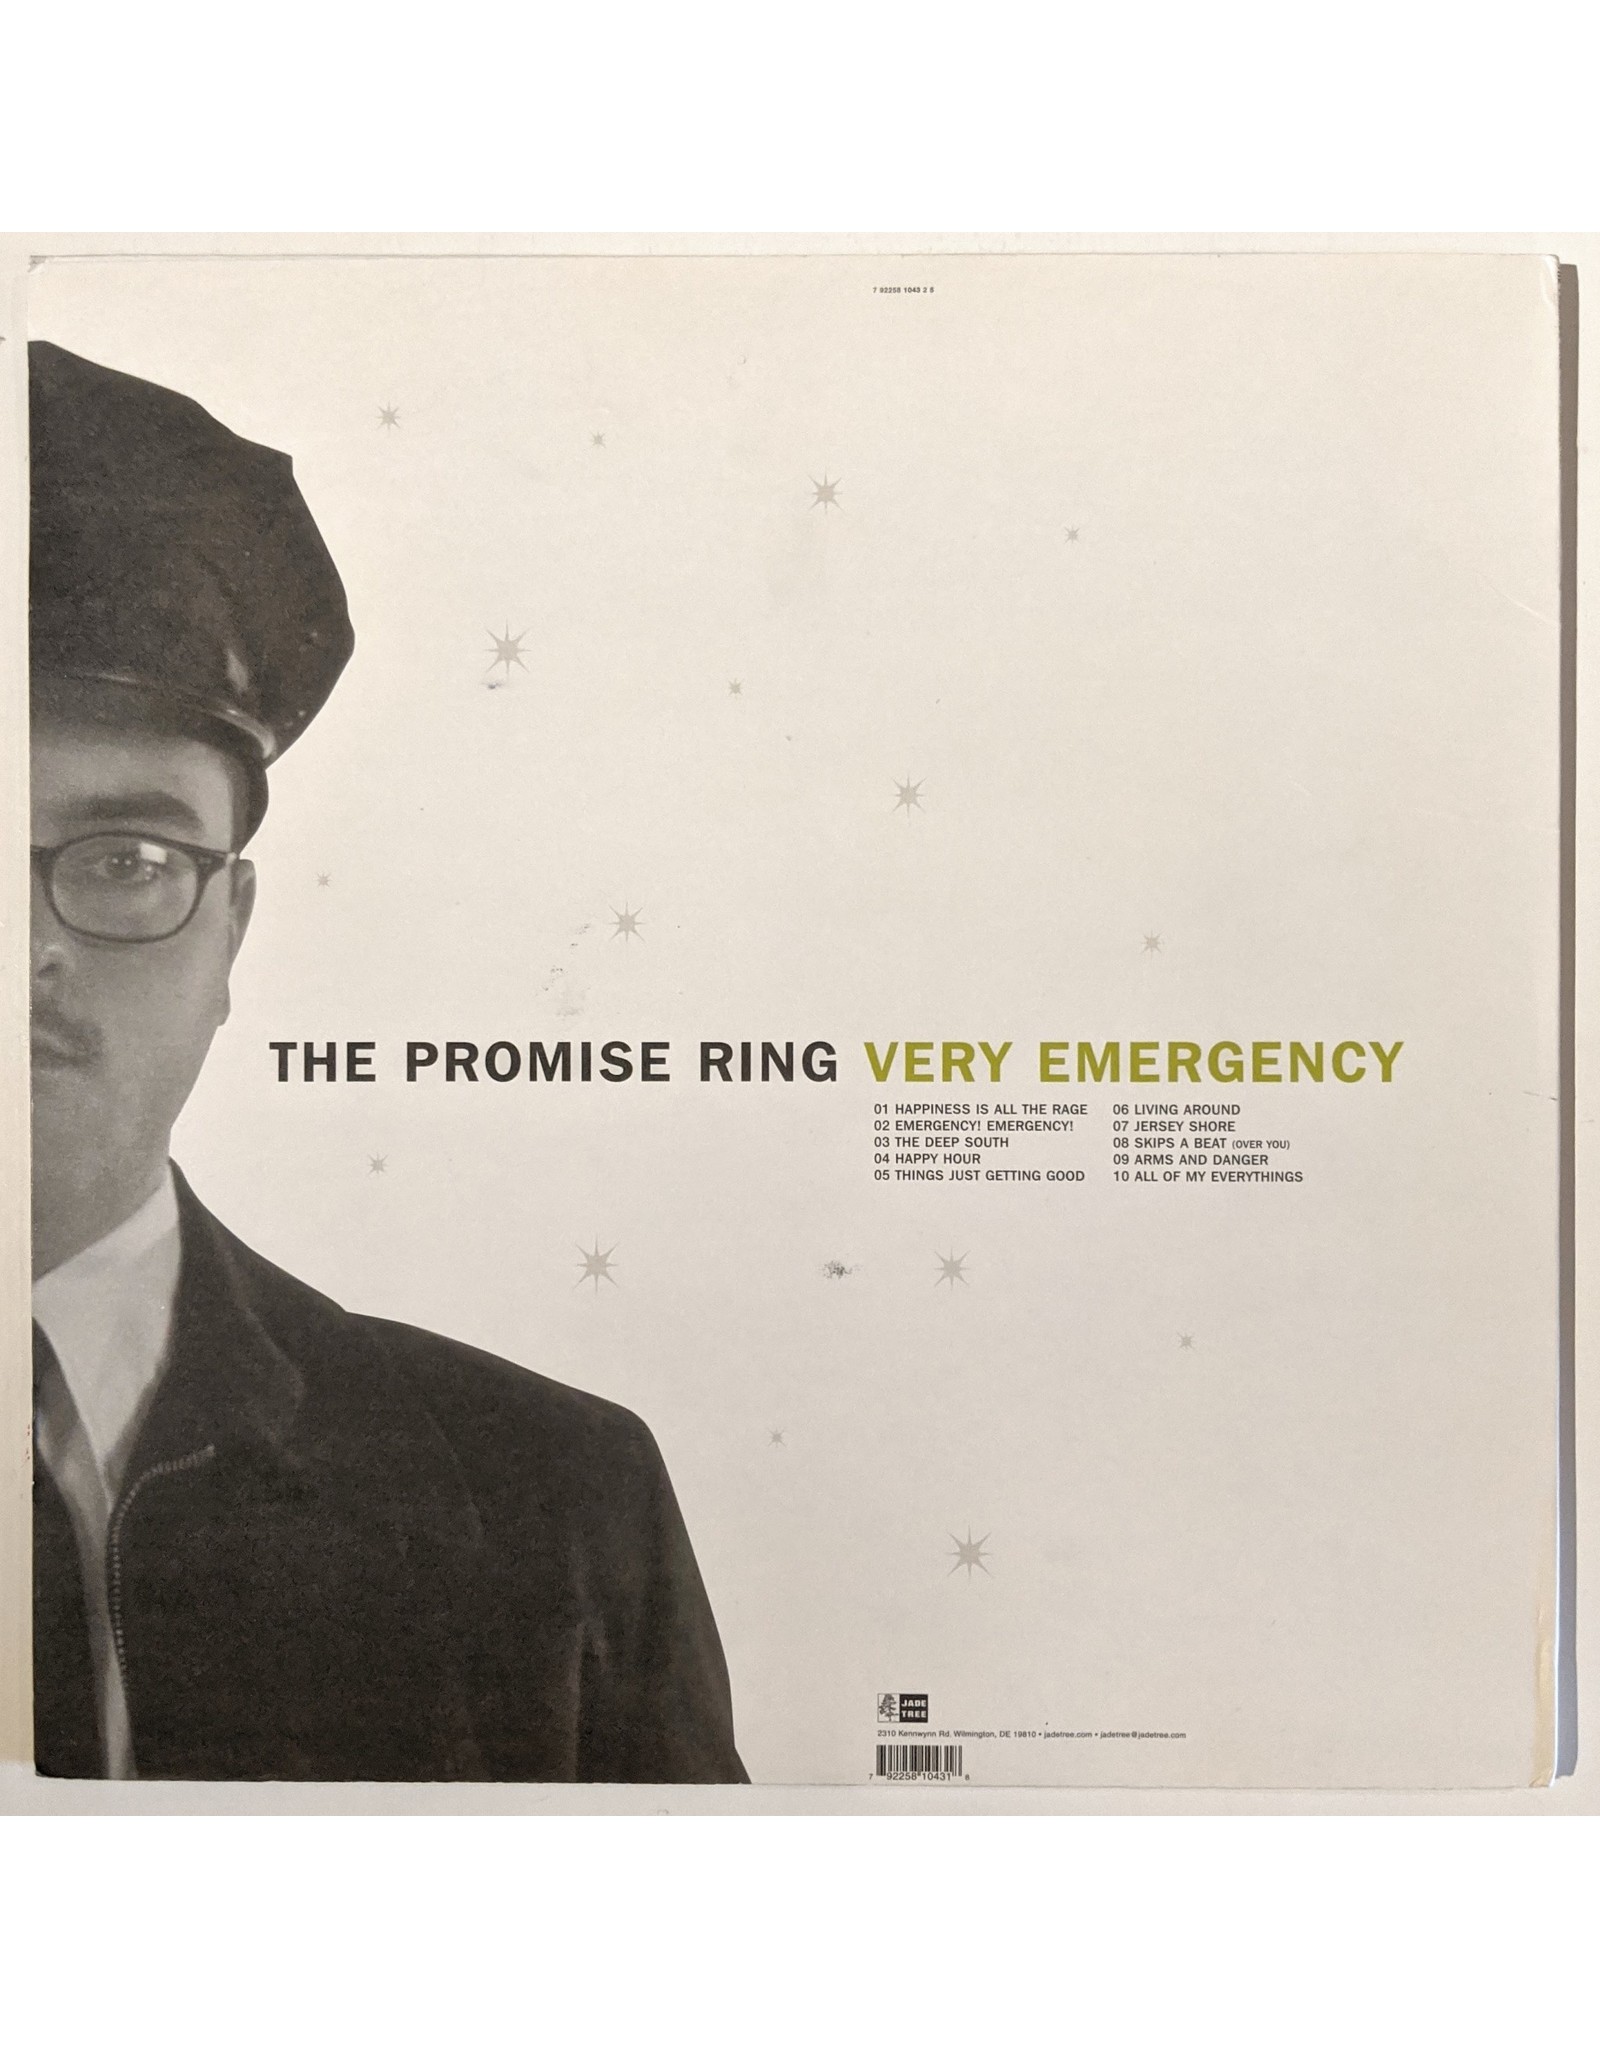 USED: The Promise Ring: Very Emergency LP - Listen Records